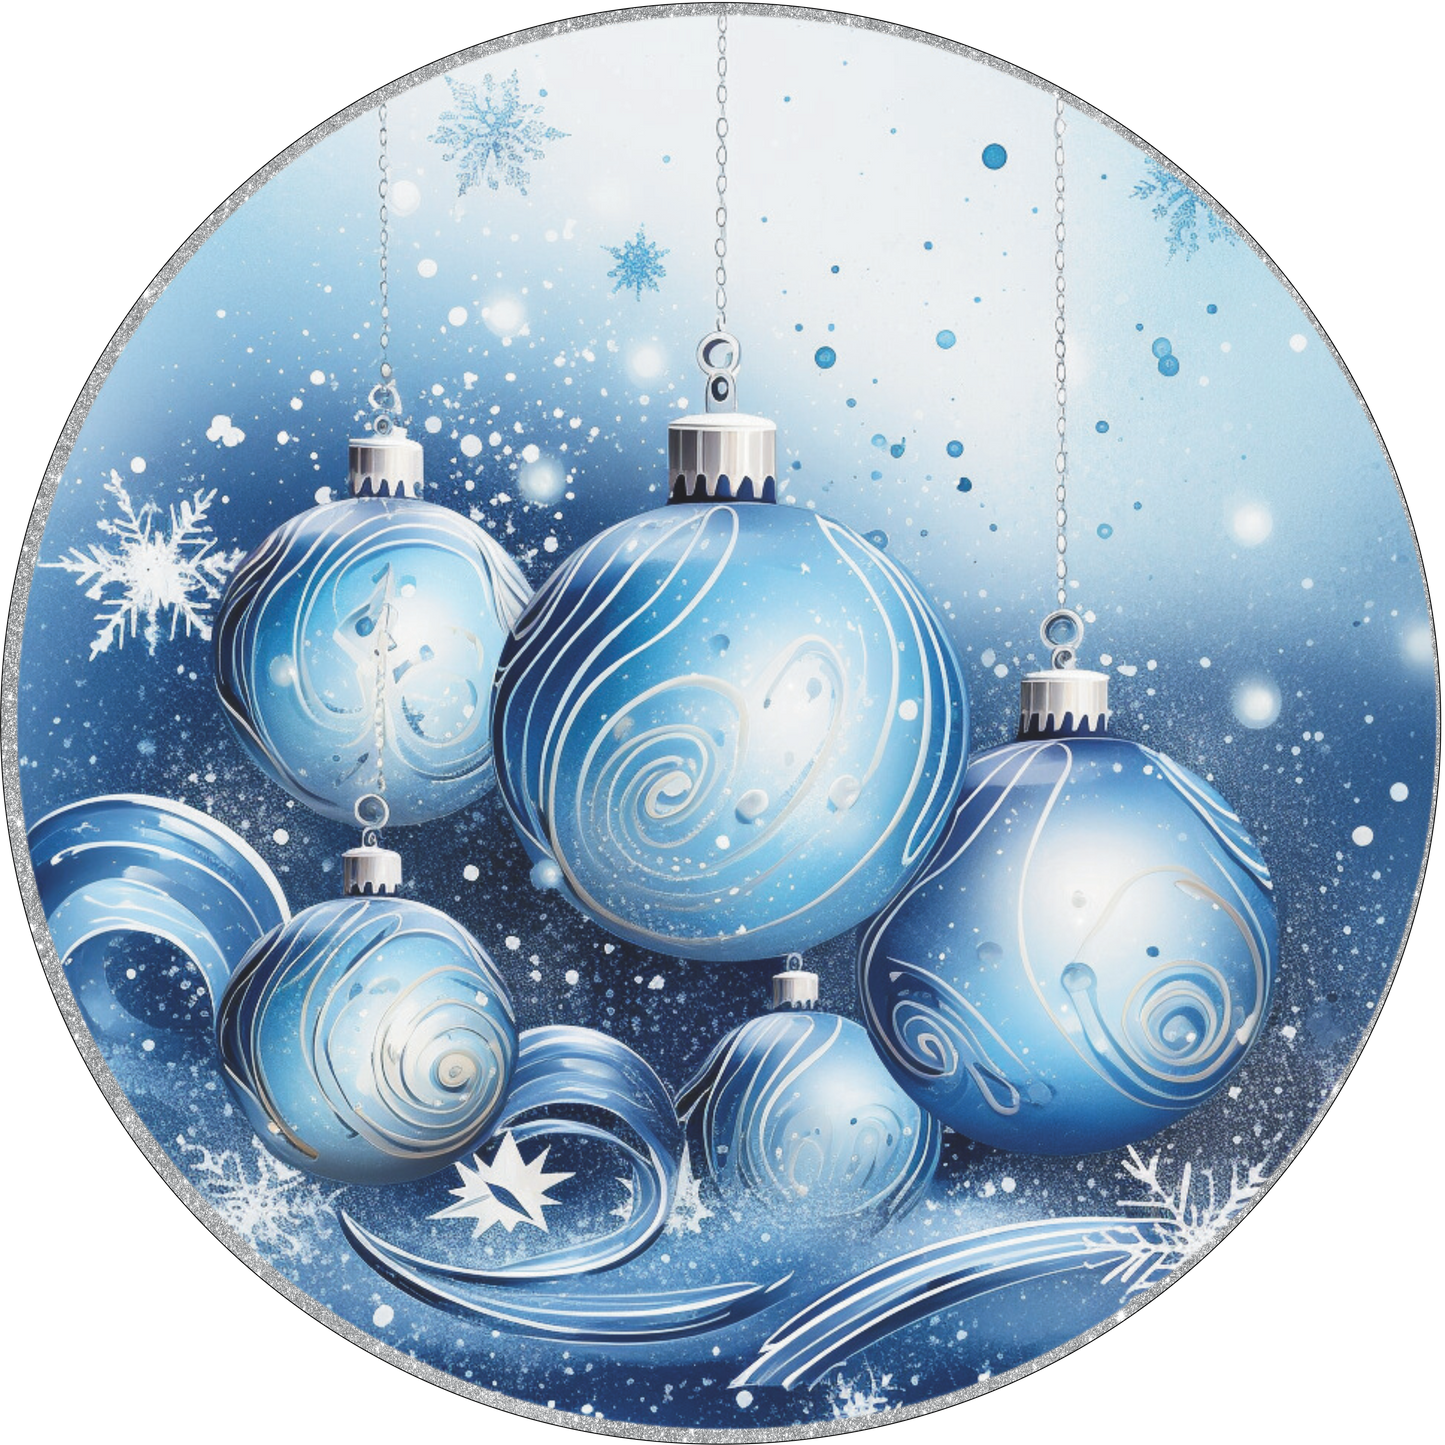 Blue and Silver Ornaments with Snowflakes and Swirls Round